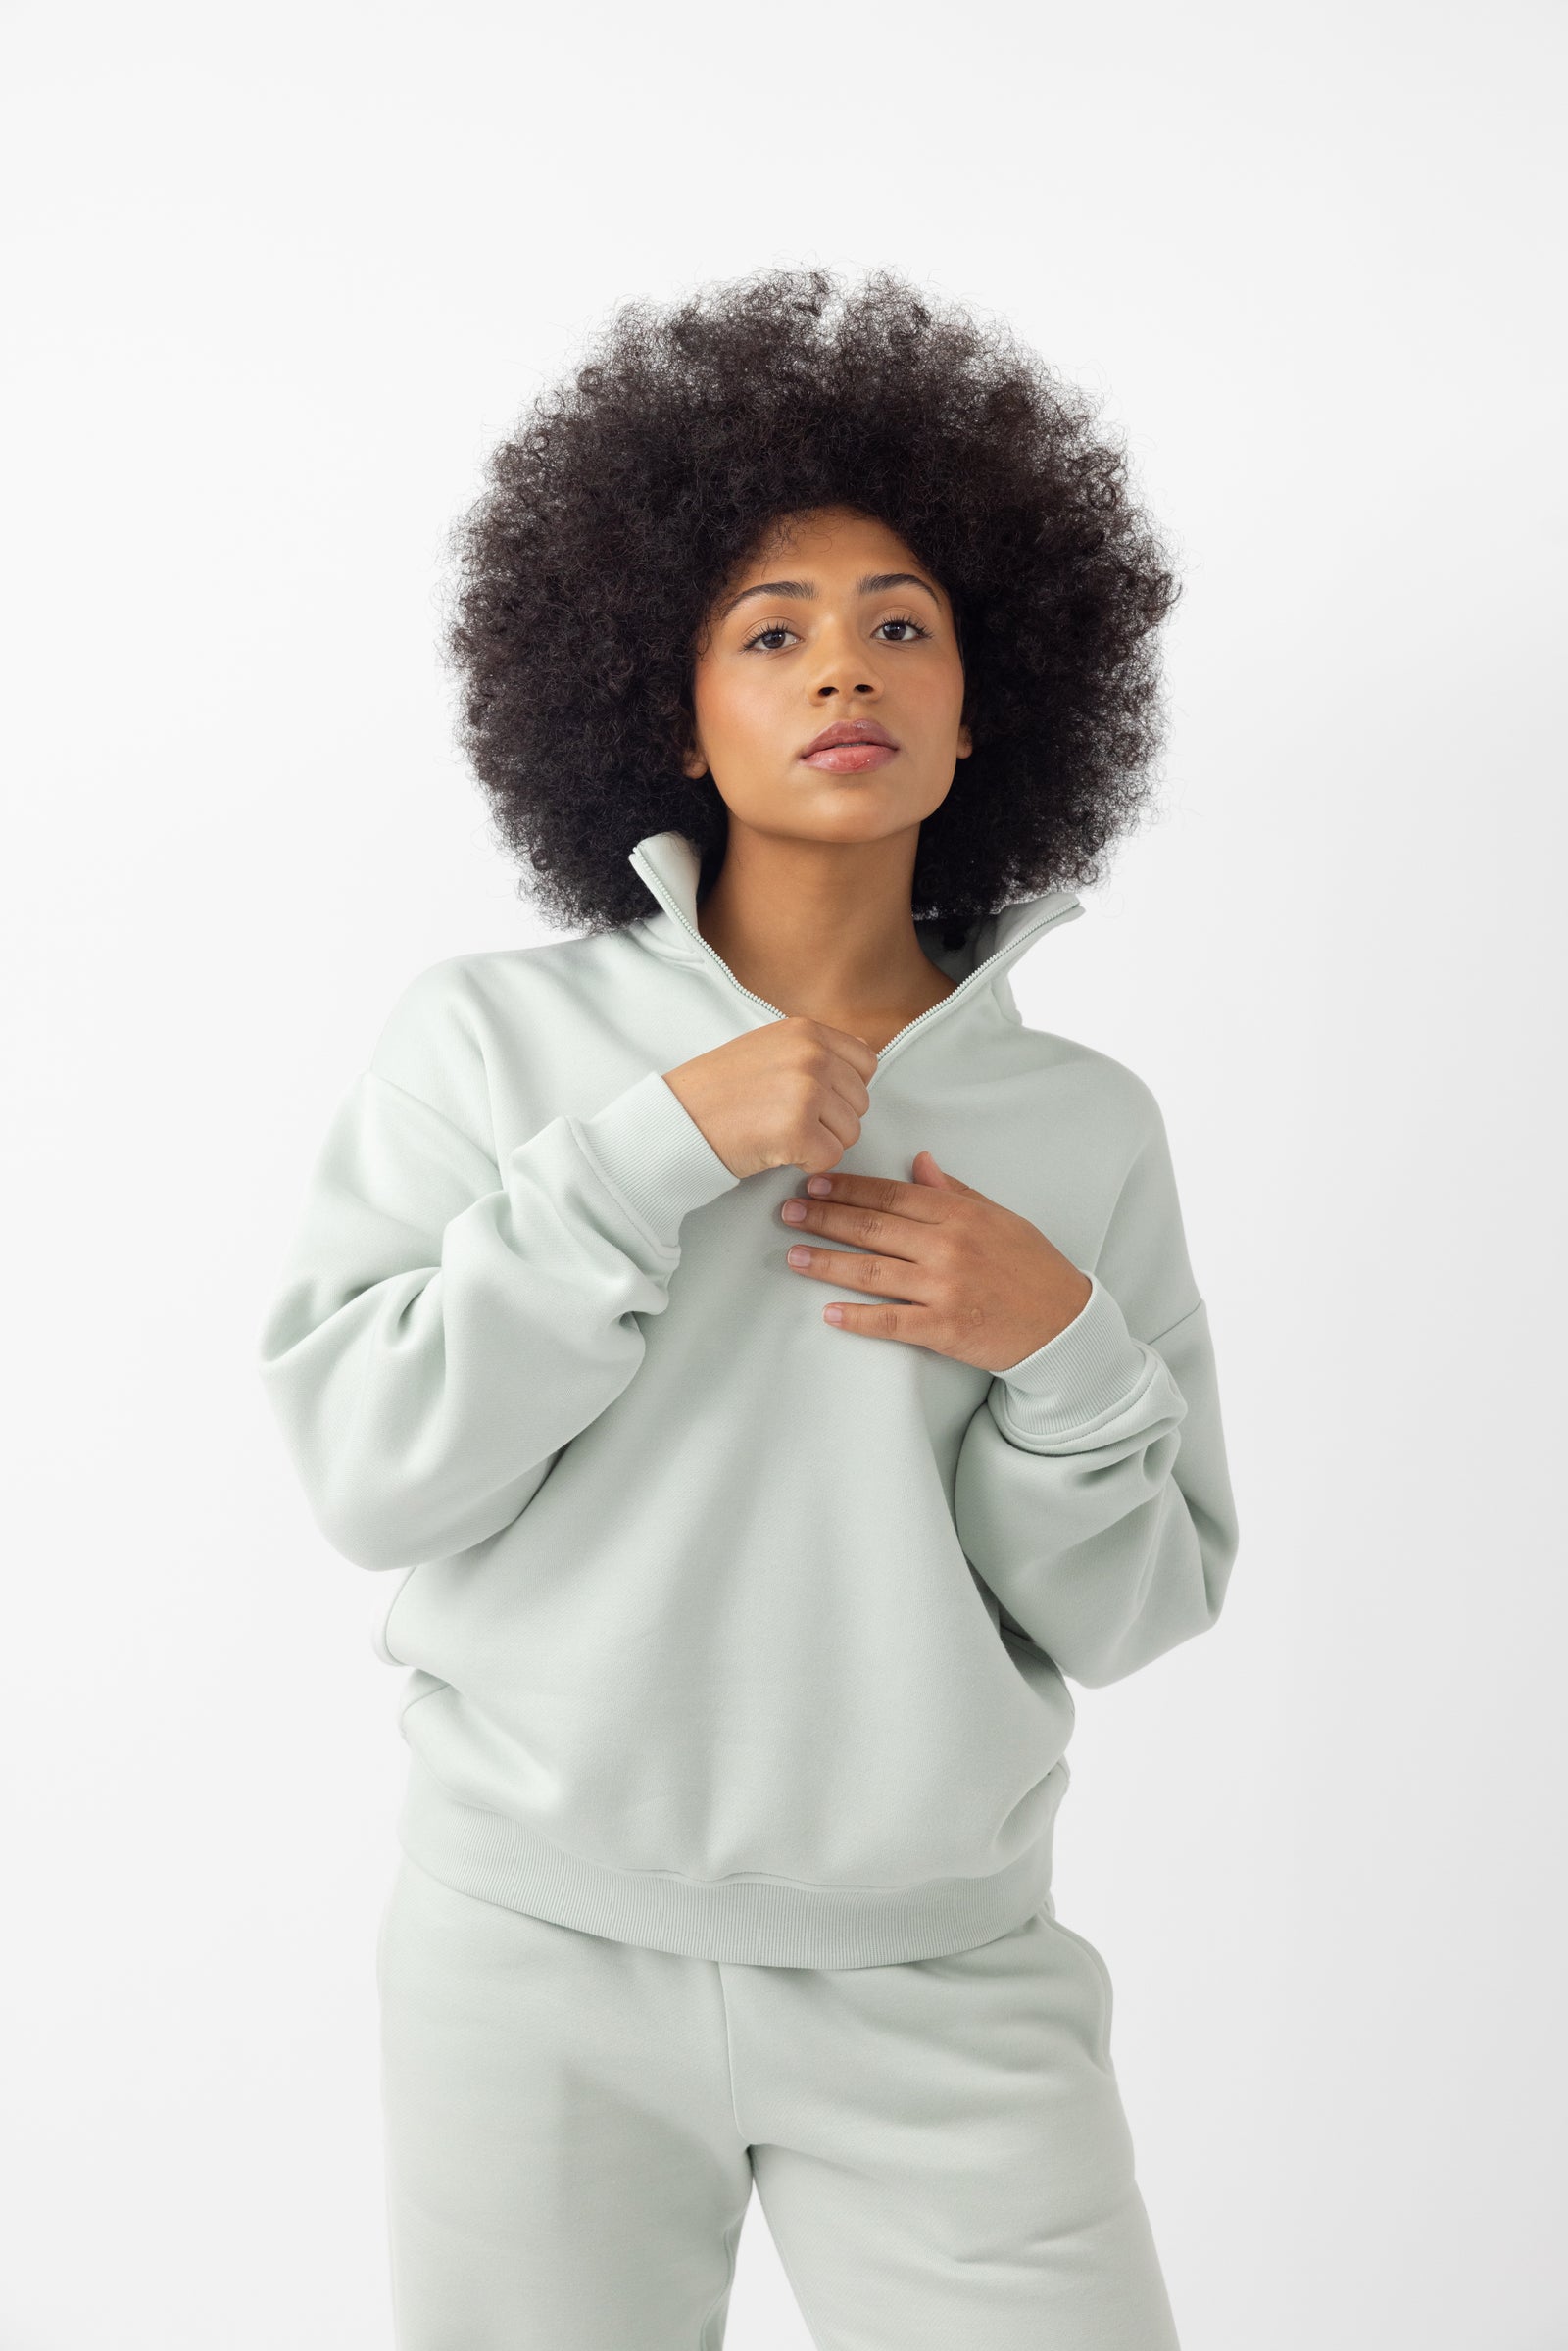 Arctic CityScape Quarter Zip. The quarter zip is being worn by a female model. The model is wearing accompanying CityScape clothing to complete the look of the quarter zip. The photo was taken with a white background. 